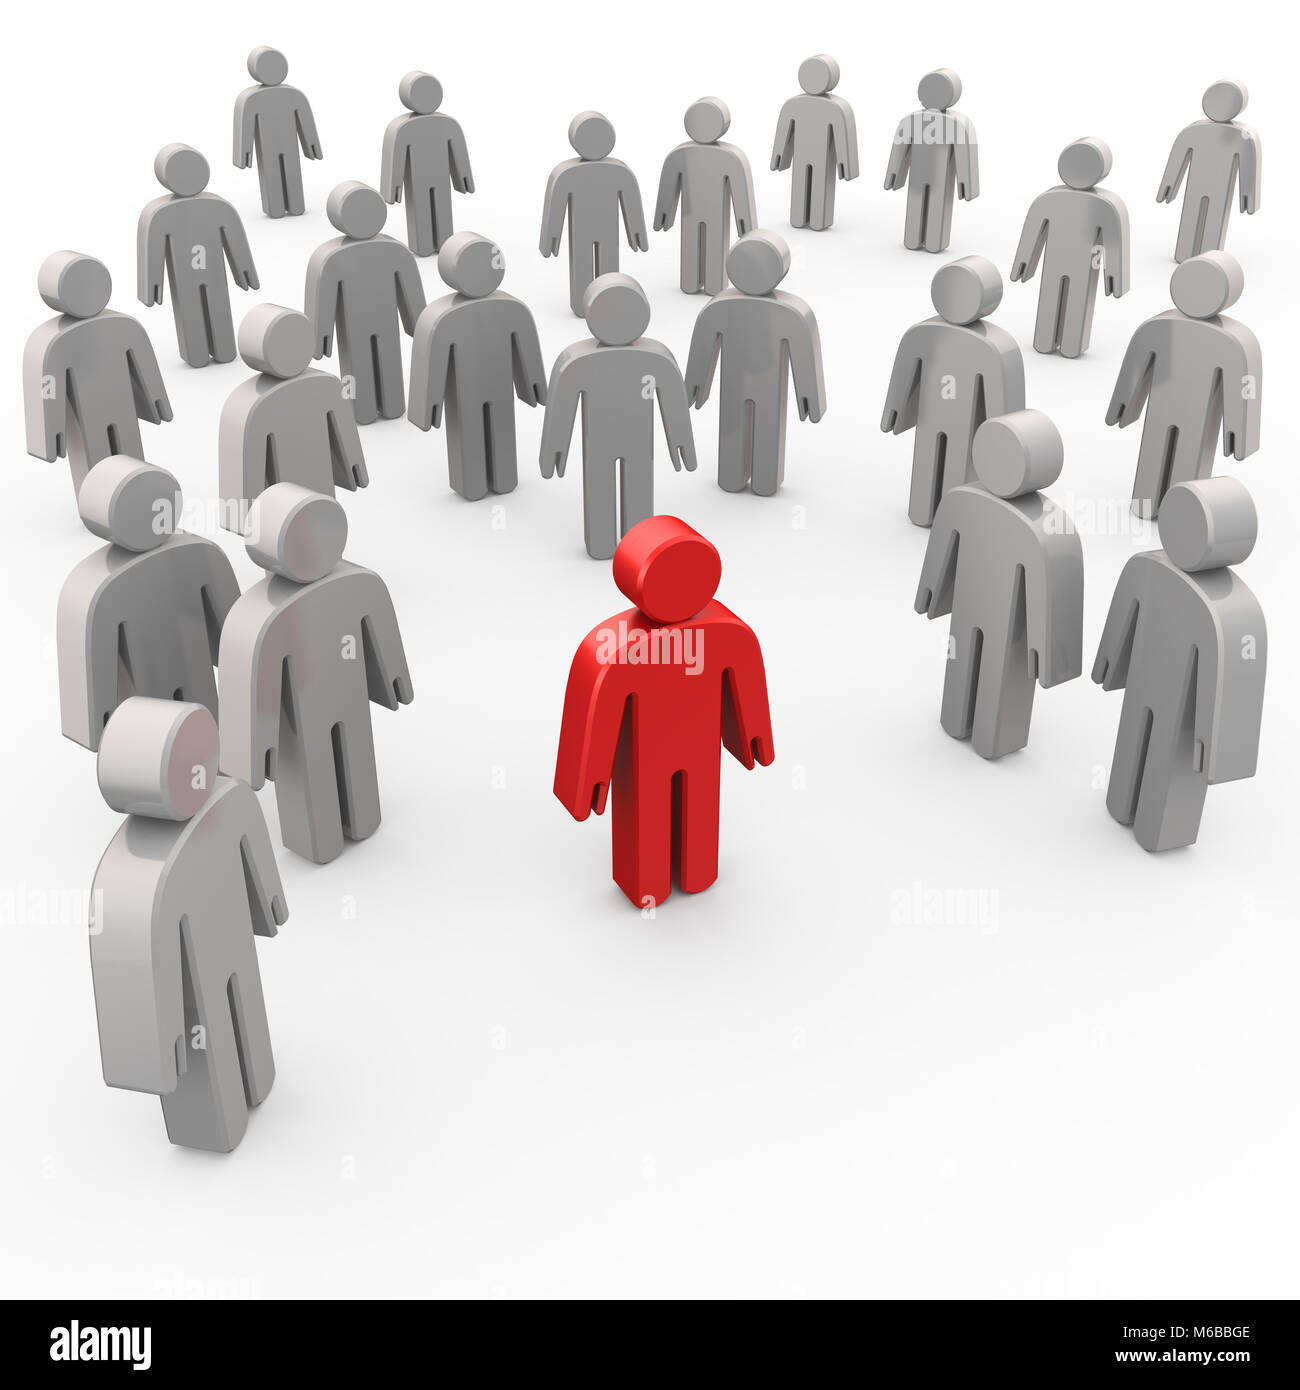 Leader man graphic background 3d rendering Stock Photo